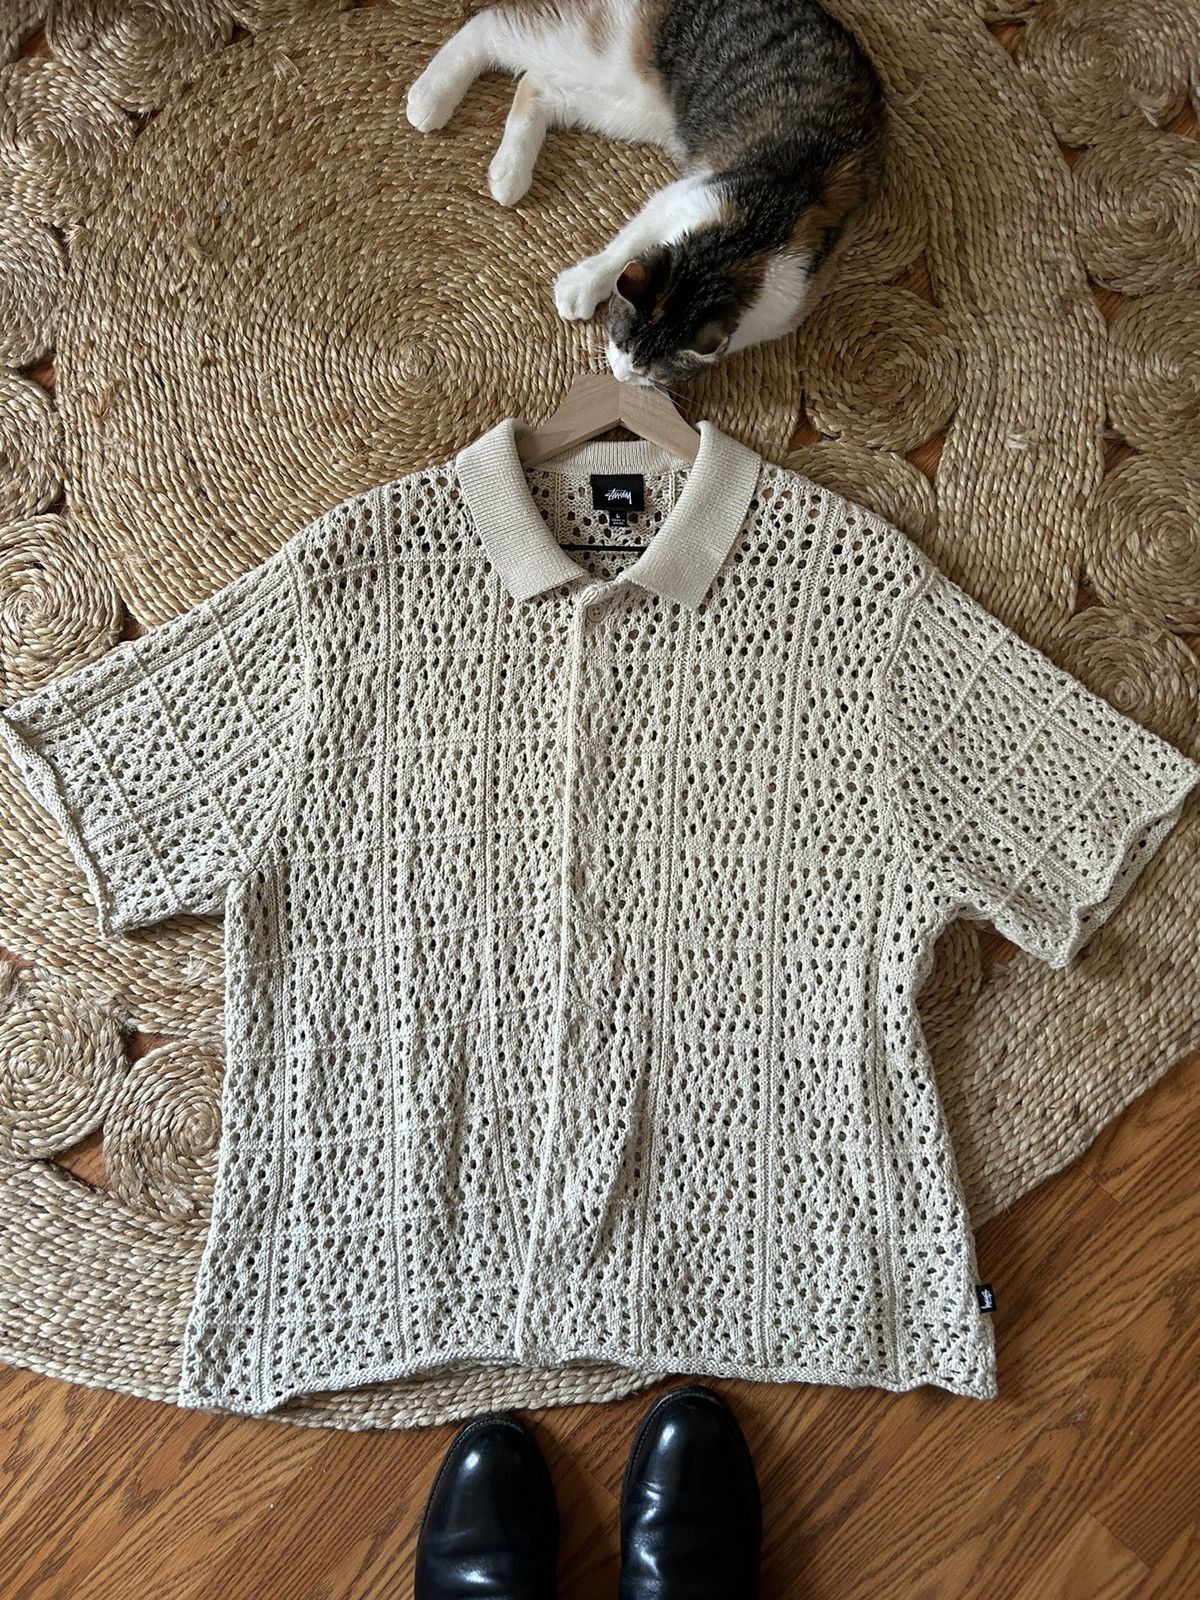 Stussy Stussy Crochet Button Up | Grailed